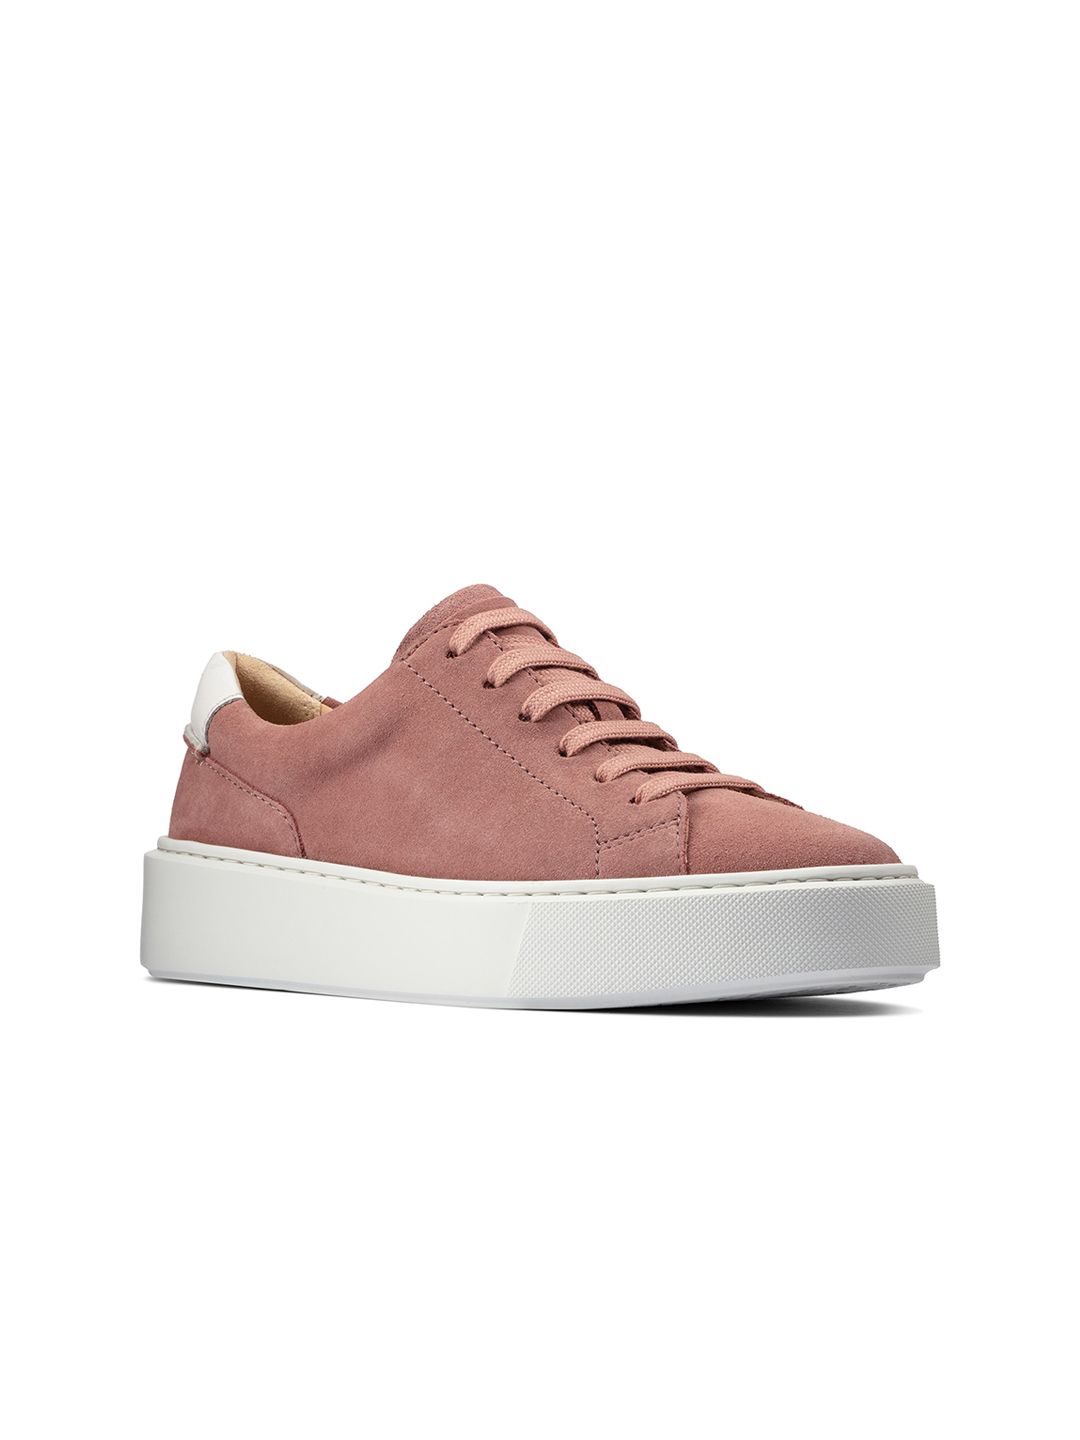 Clarks Women Rose Coloured Suede Sneakers Price in India